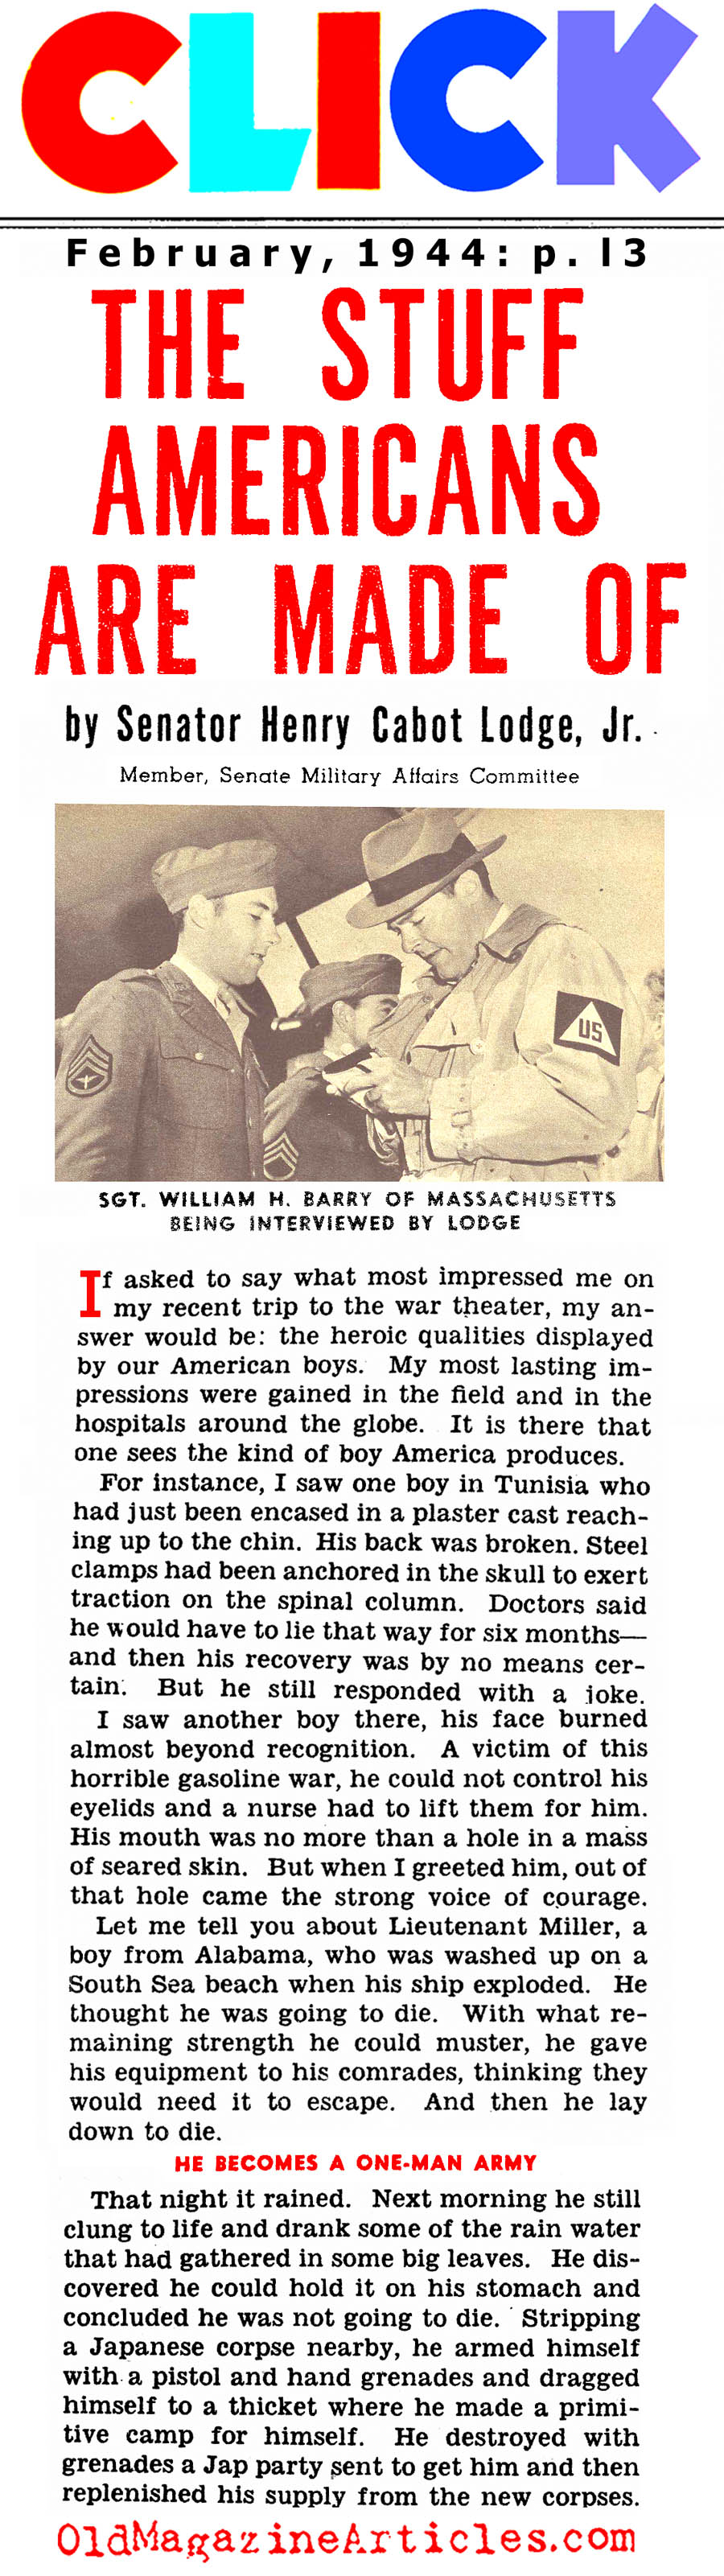 The Mettle of Americans (Click Magazine, 1944)